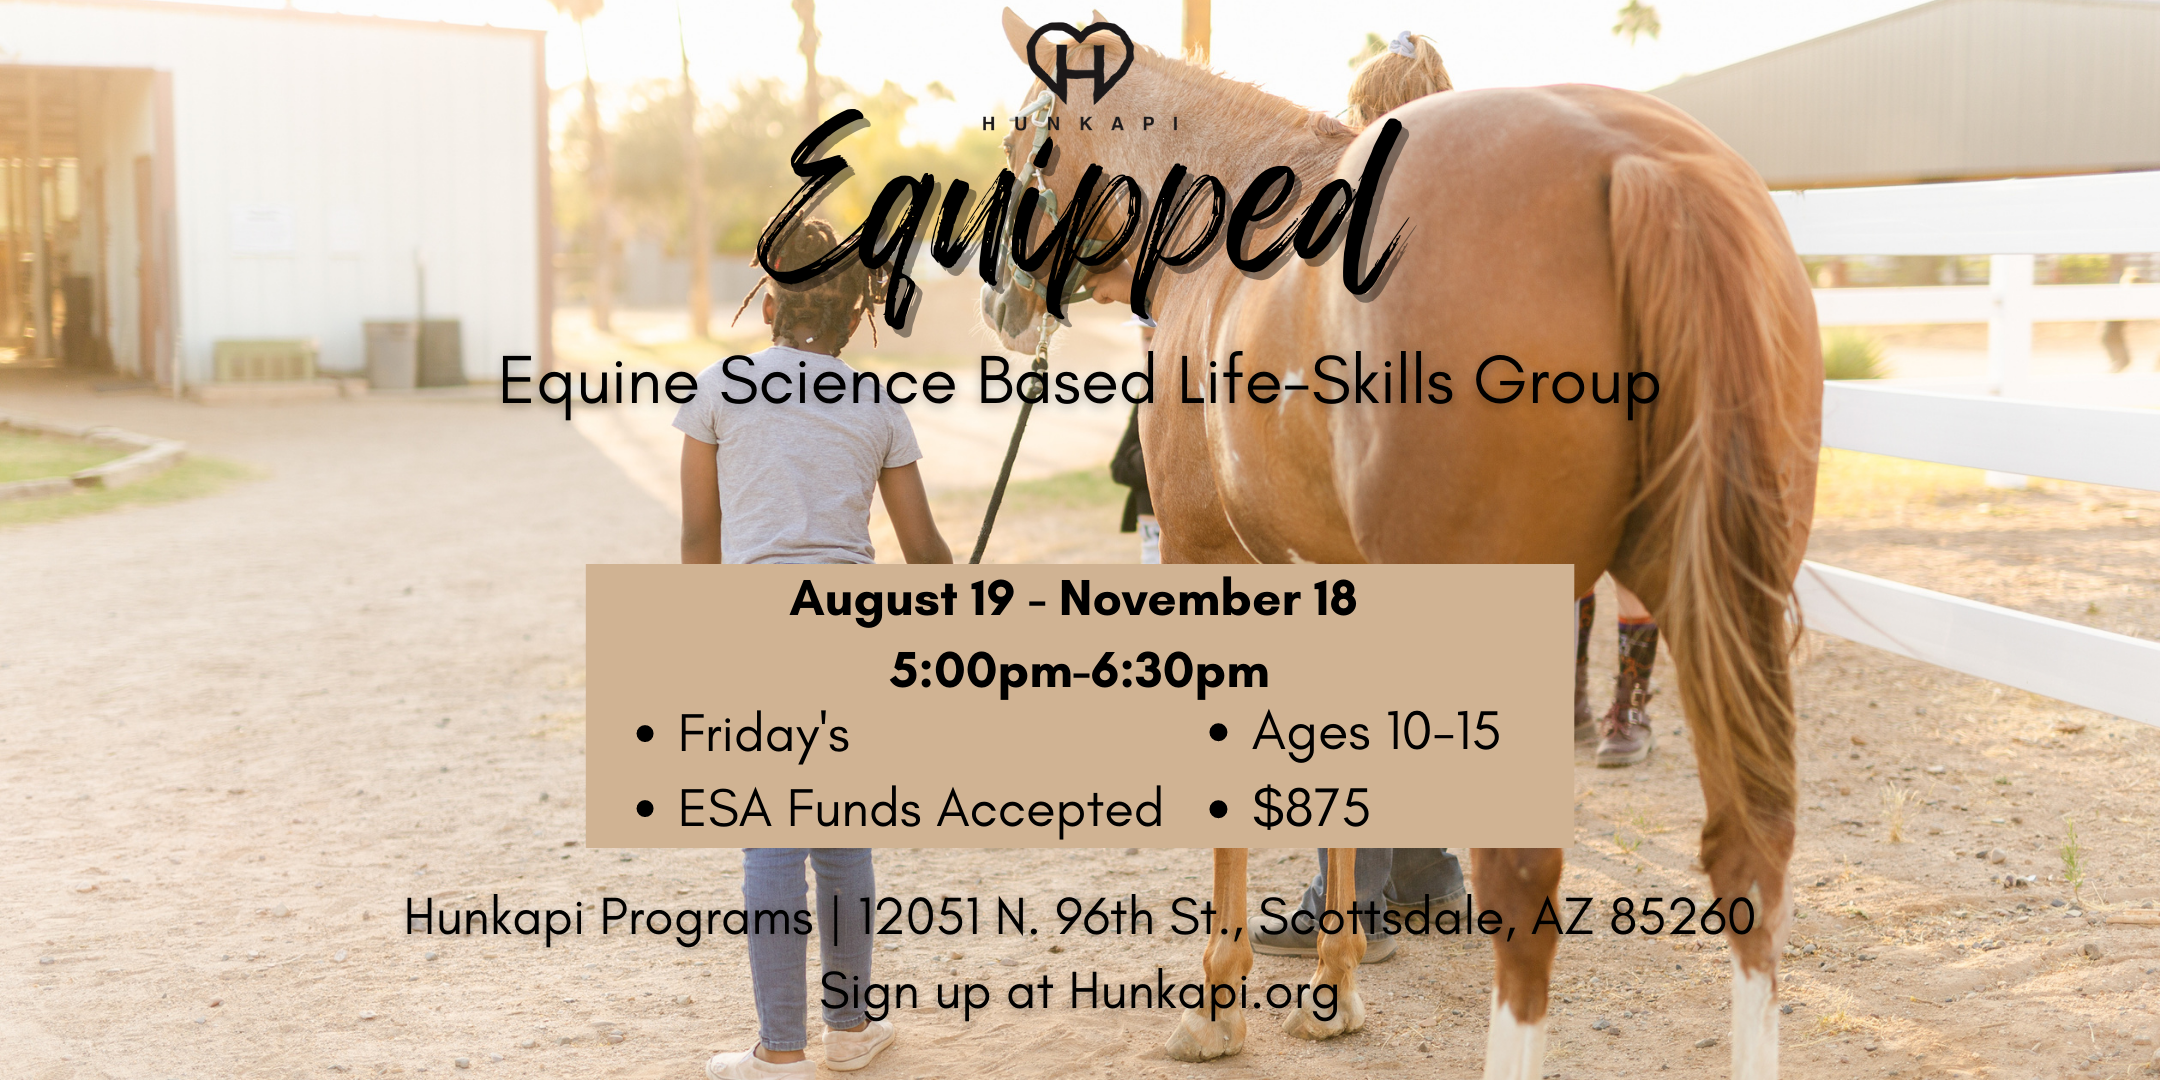 Equipped - Equine Science Based Life-Skills Group (2)